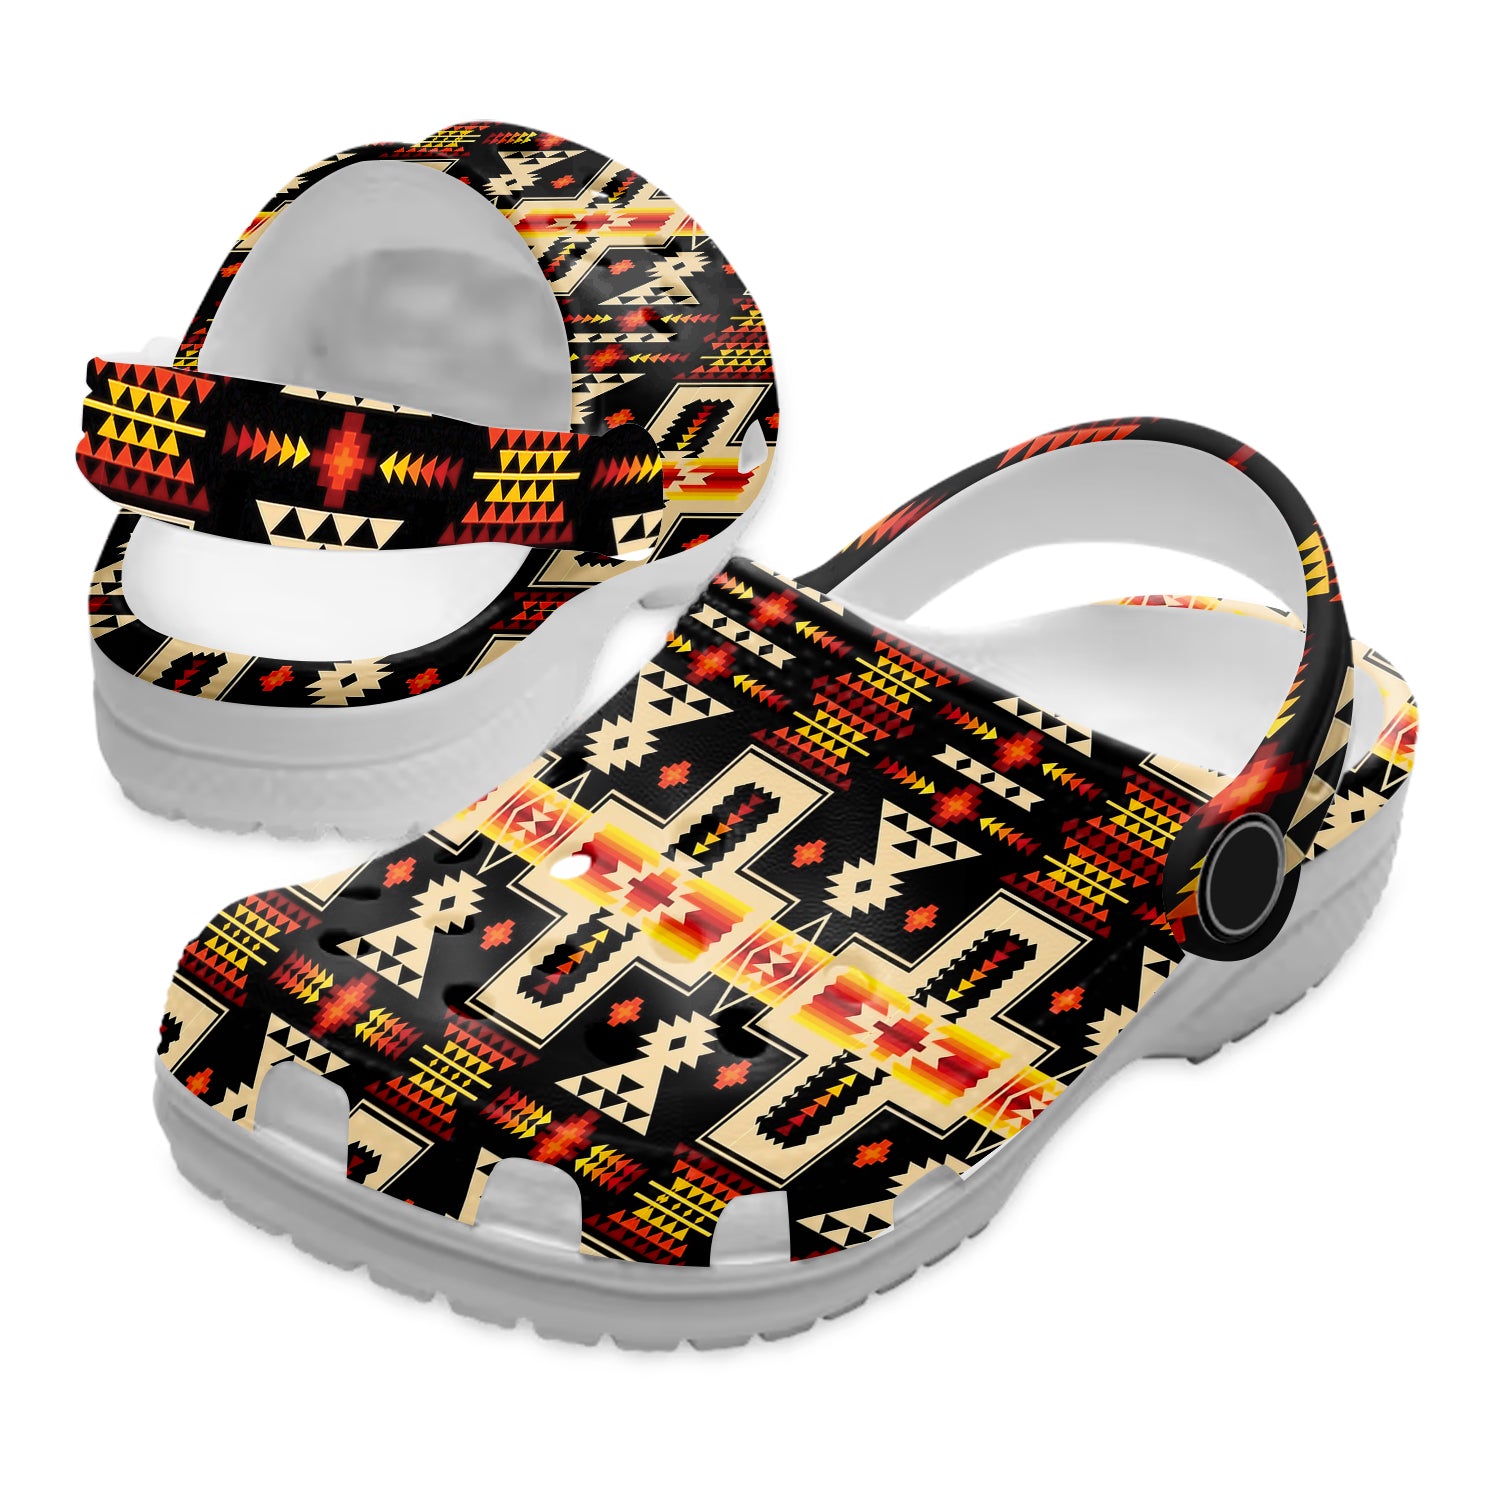 Crocs Clog Shoes For Kid and - Native Heritage Store